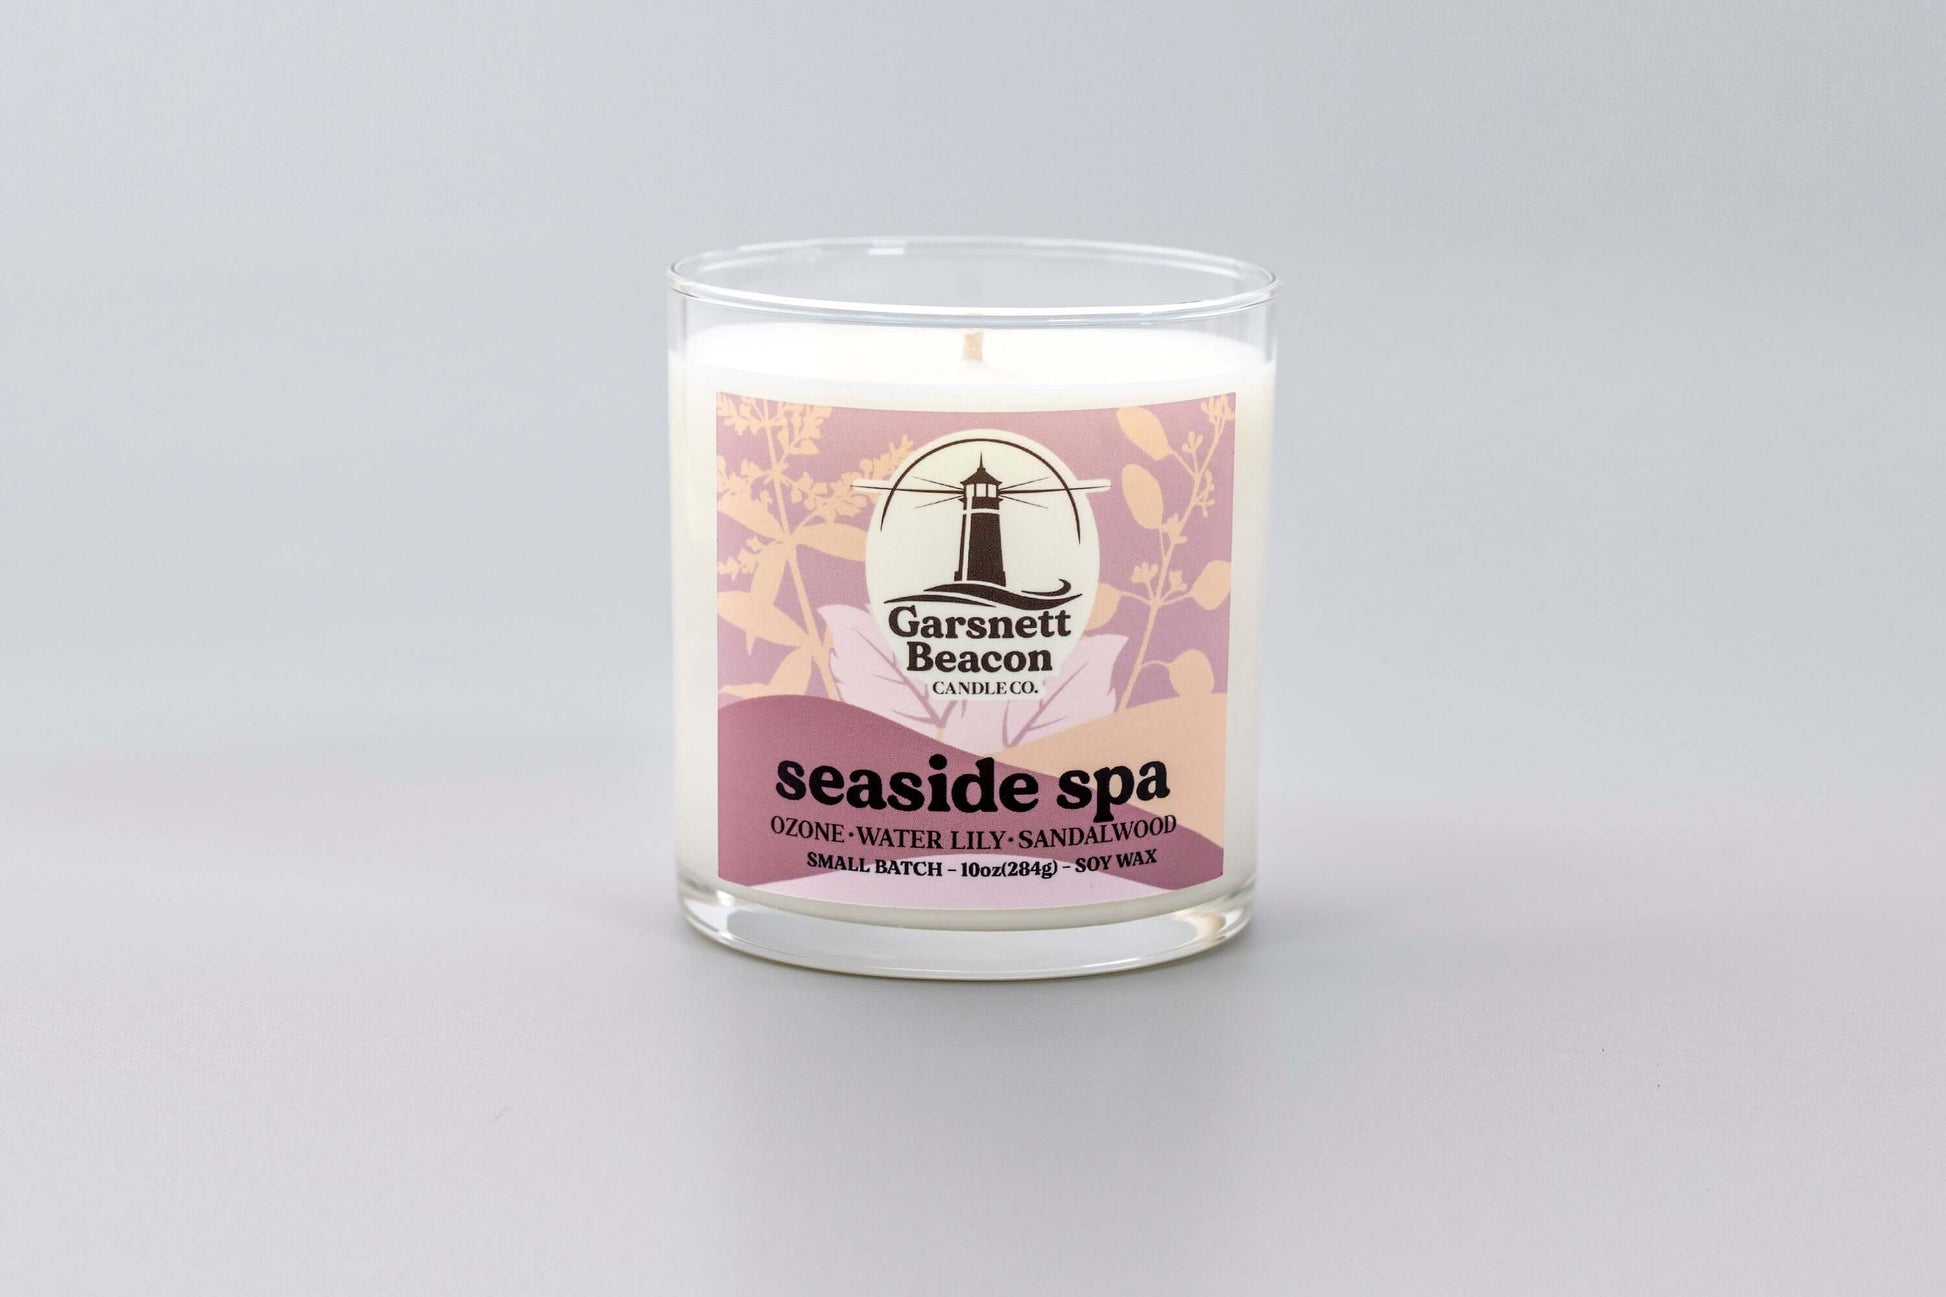 Jasmine Water Lily Sandalwood Moss Ozone Apple scented candles called Seaside Spa in glass ceramic tin and wax melts